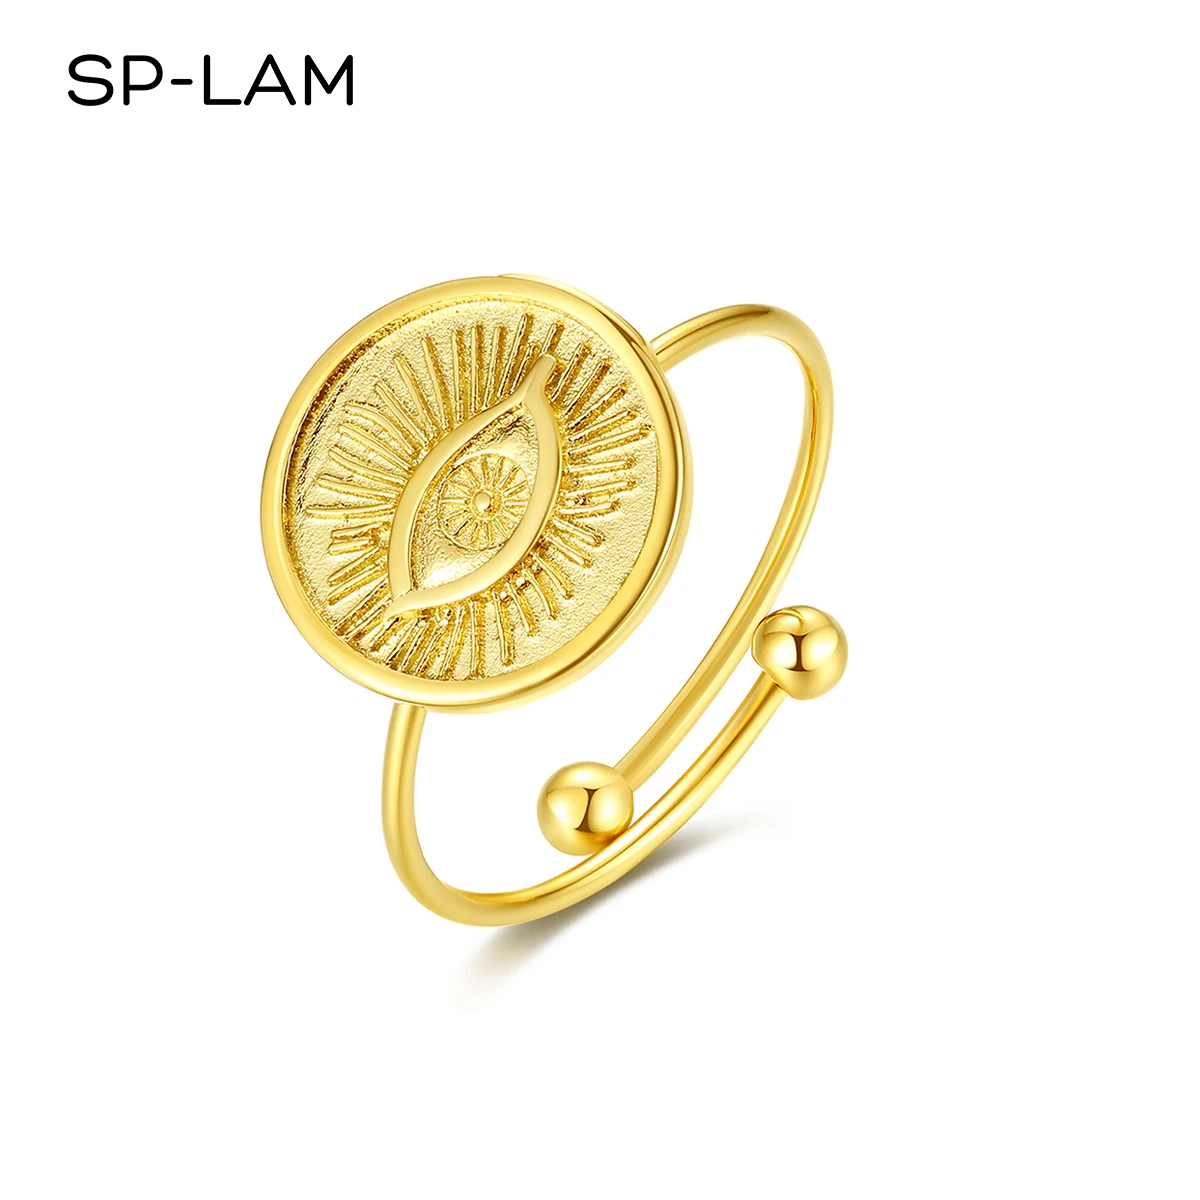 

SP-LAM Gold Plated Elegant Eye Jewelry Unique Gold Plated Stainless Steel Adjustable Trendy Ring Woman